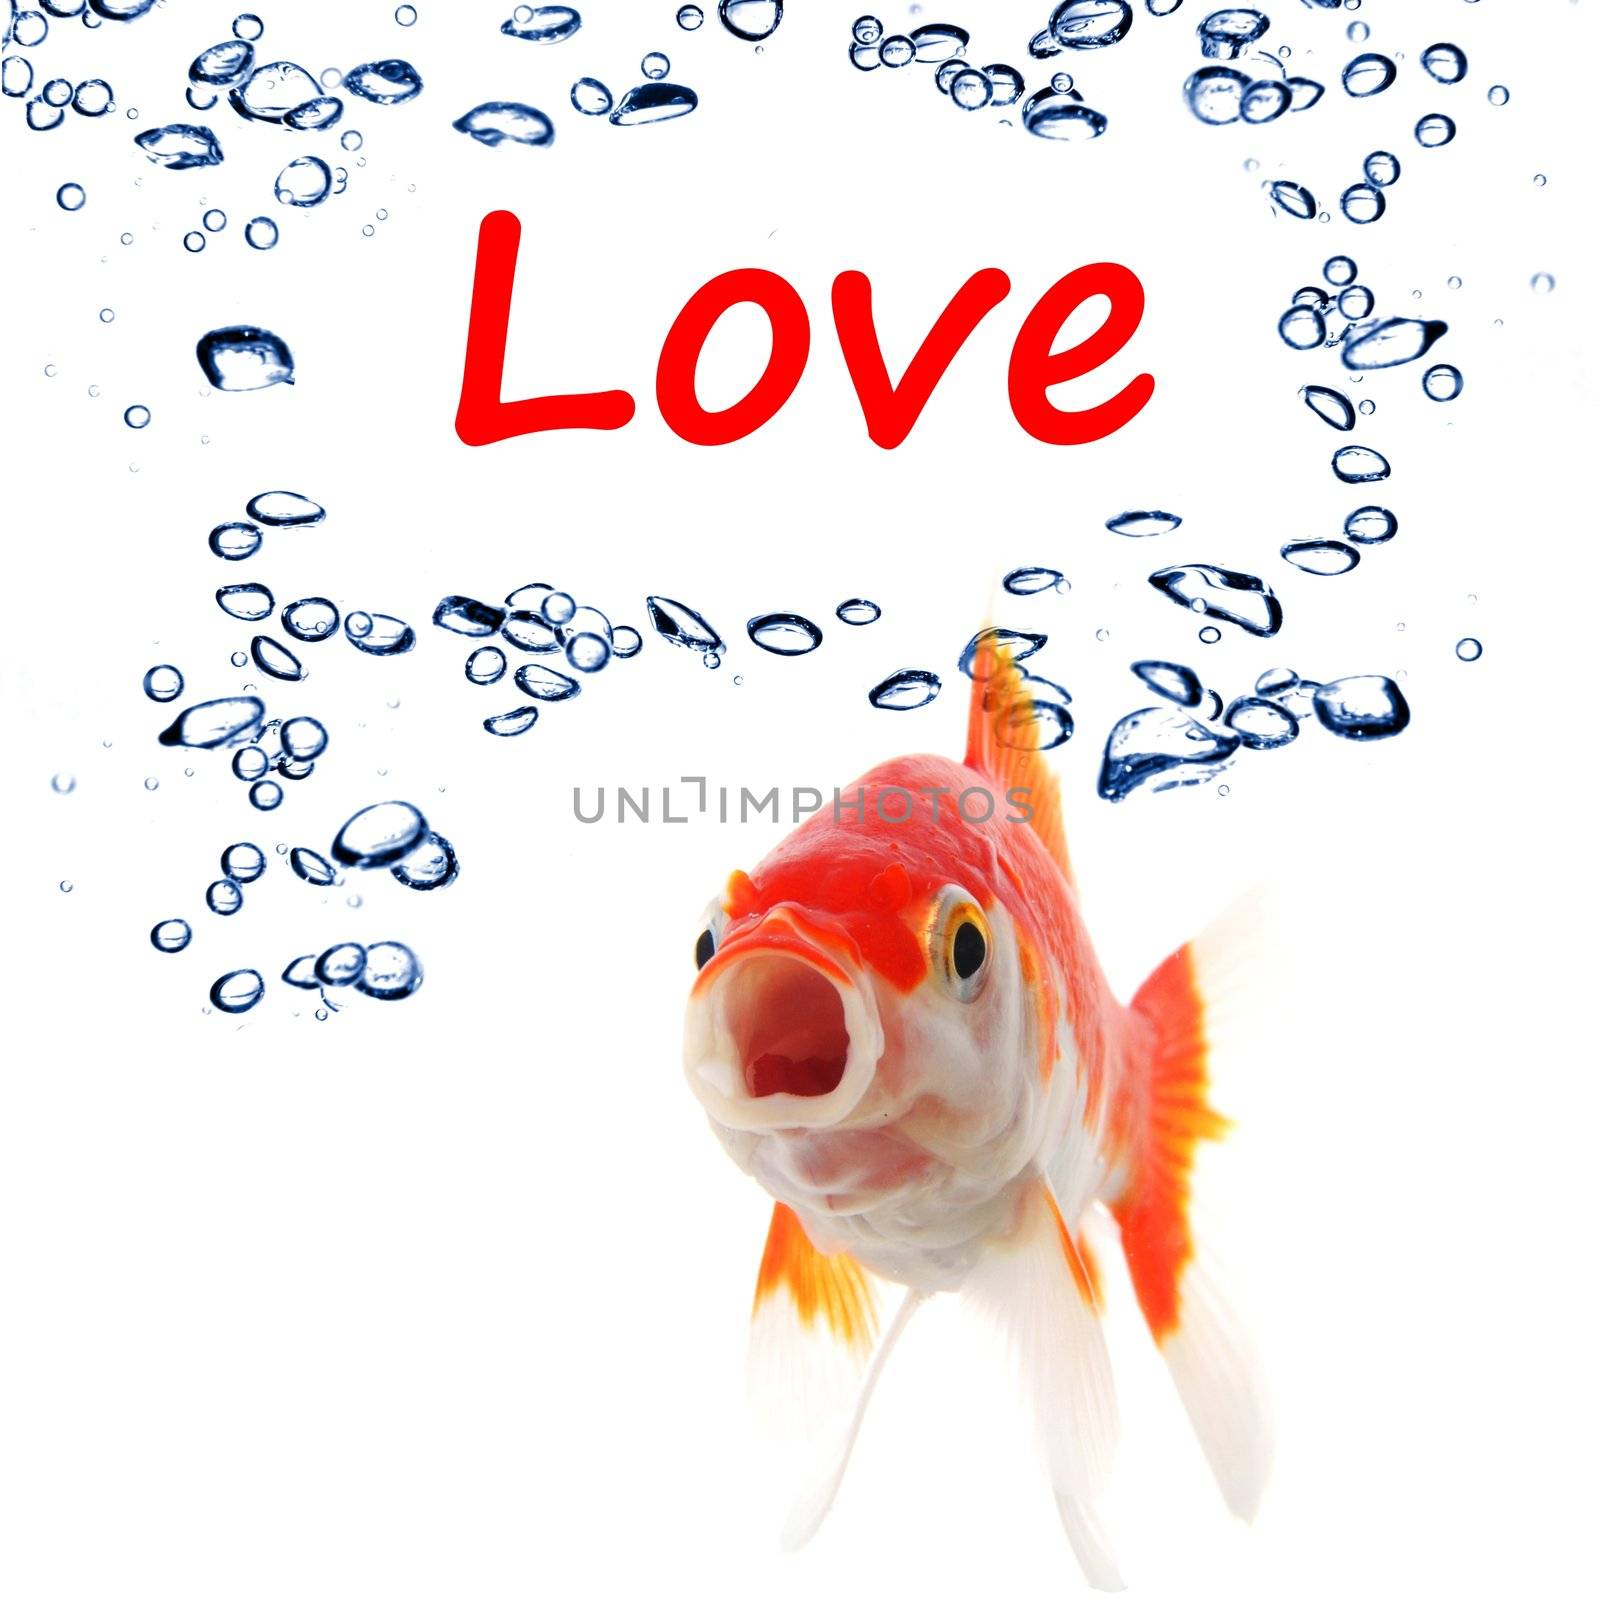 love or romance concept with goldfish on white background